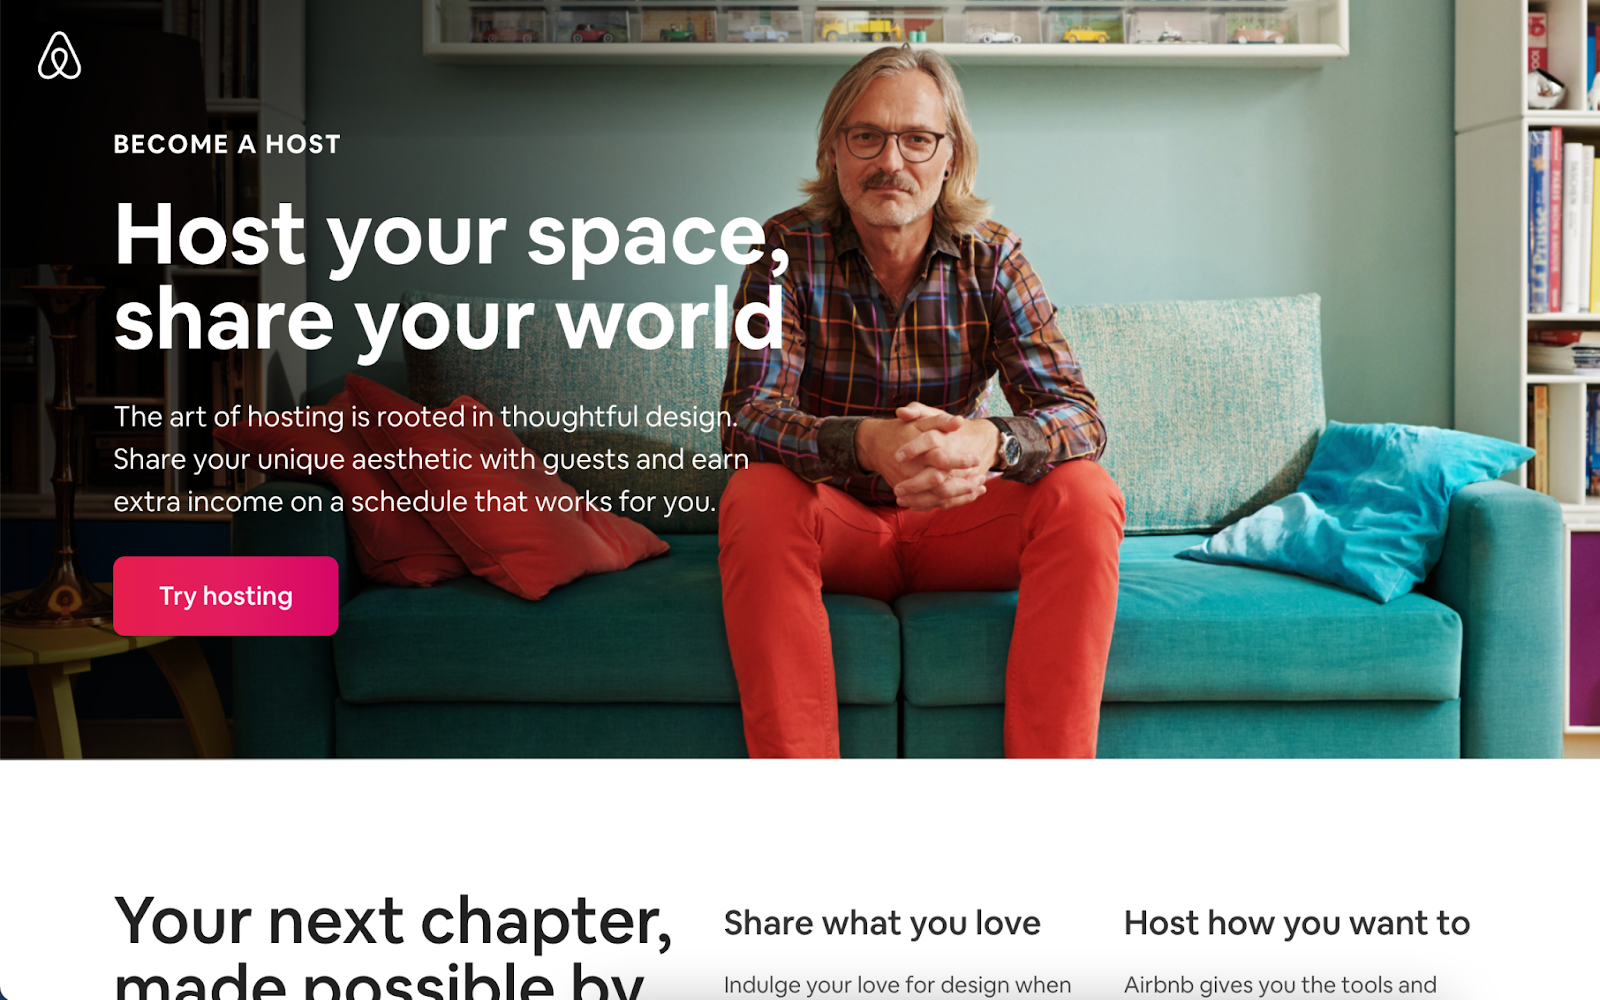 AirBnB landing page